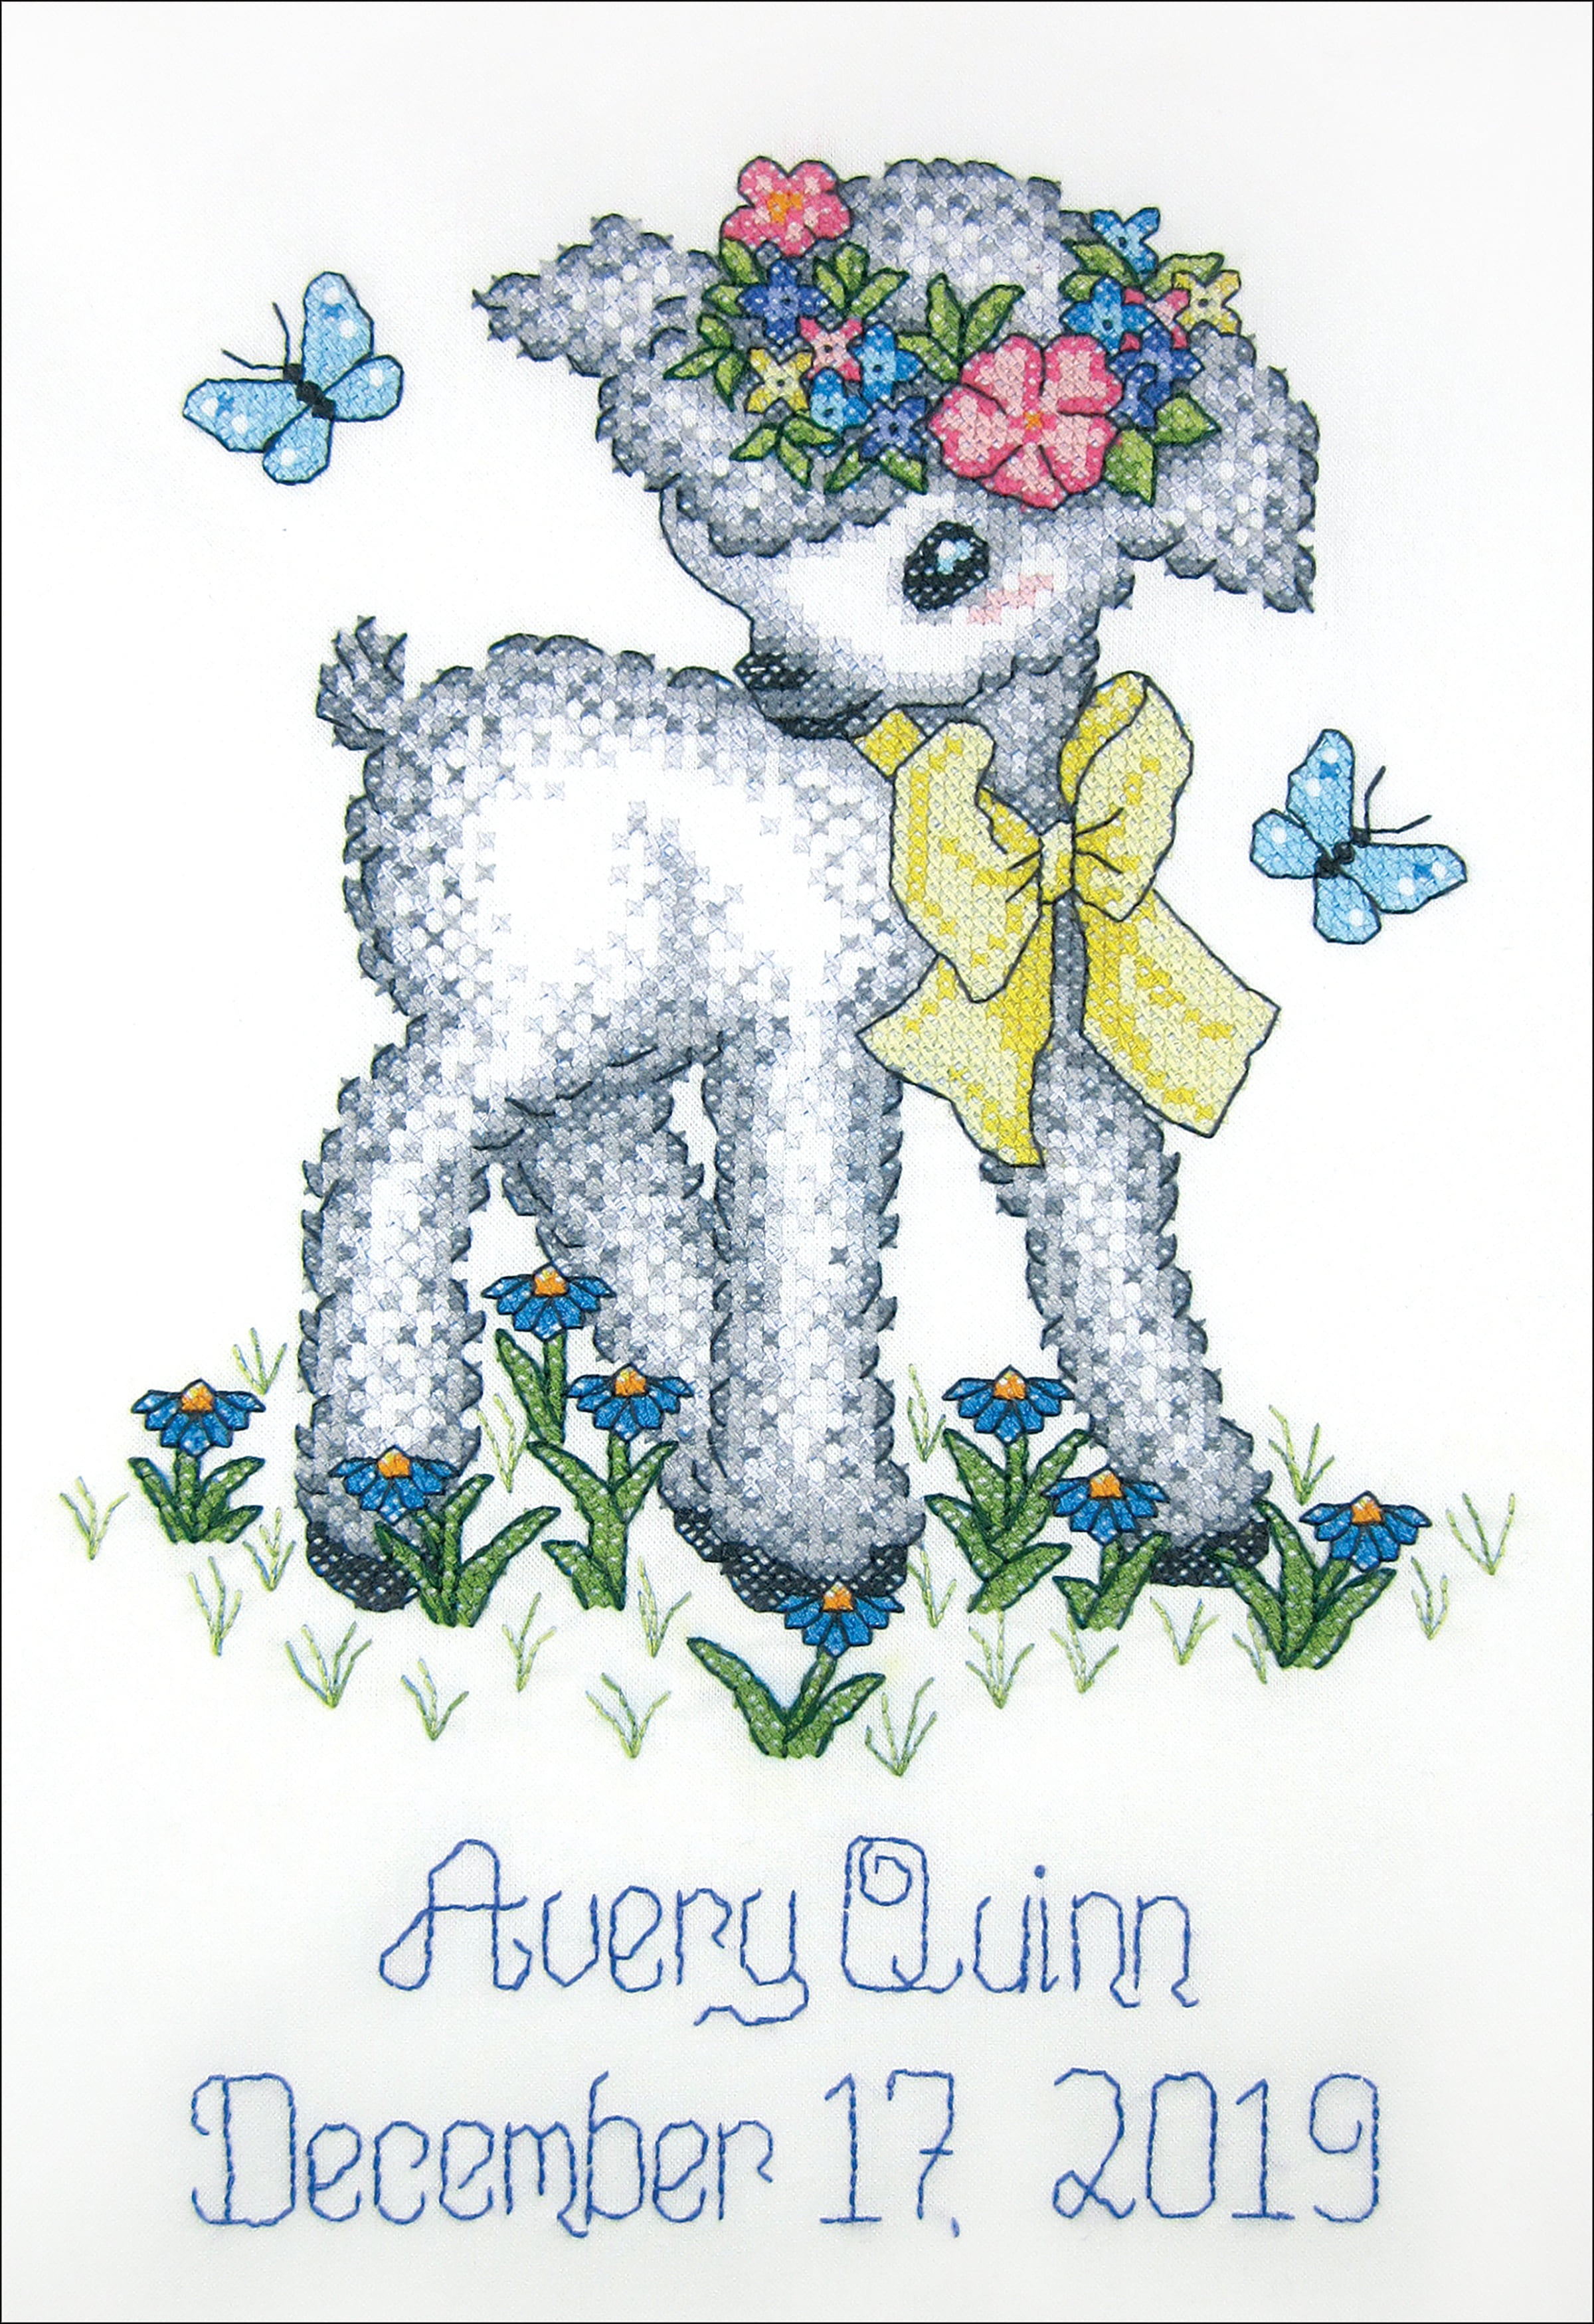 RIOLIS Mallow & Hollyhocks Bell Pull Counted Cross-Stitch Kit